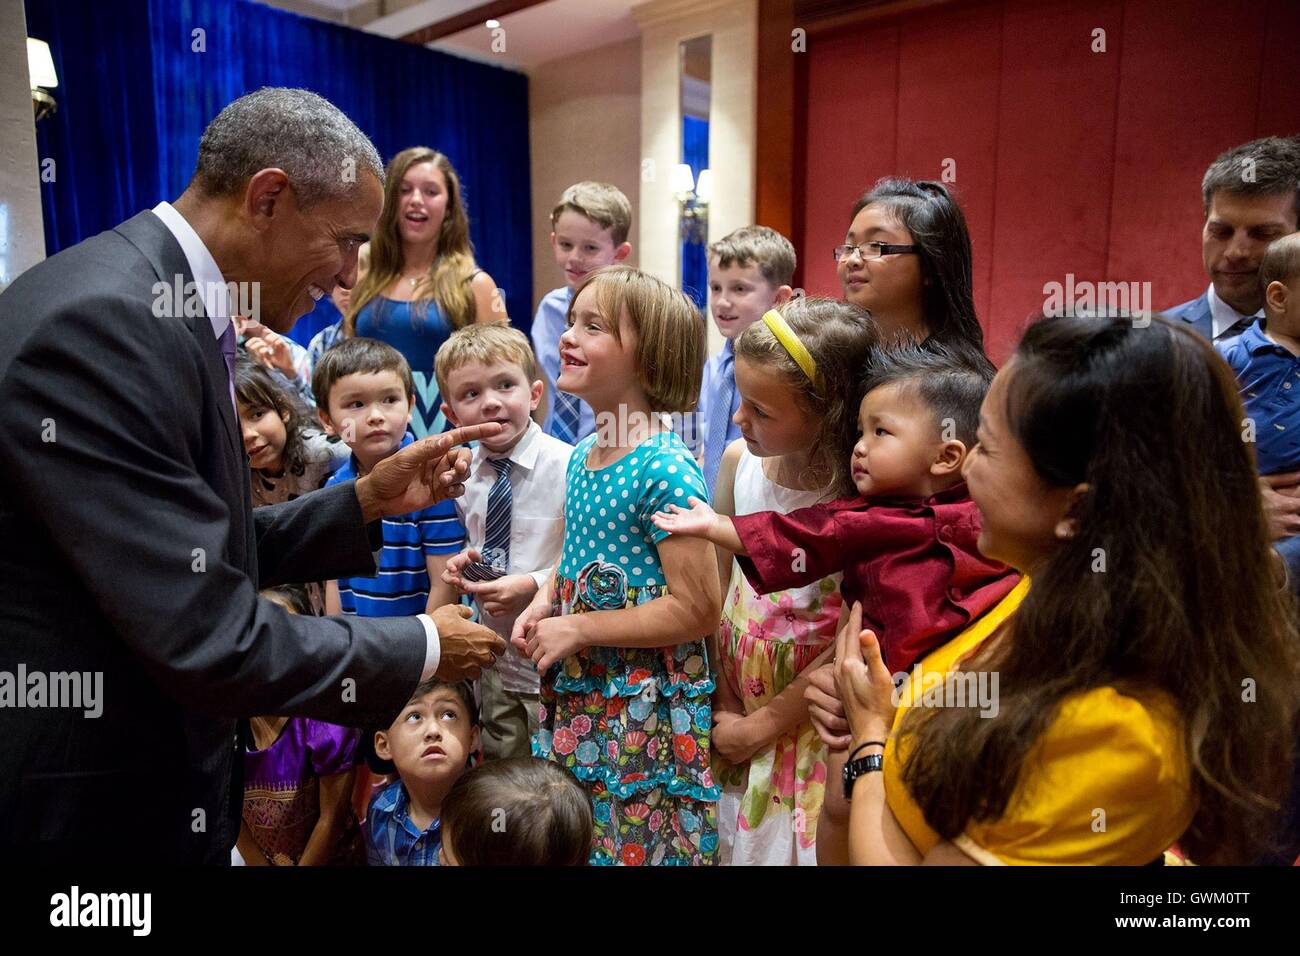 U.S President Barack Obama greets children of the U.S. Embassy staff September 6, 2016 in Vientiane, Laos. Obama is in Laos for the ASEAN Summit. Stock Photo